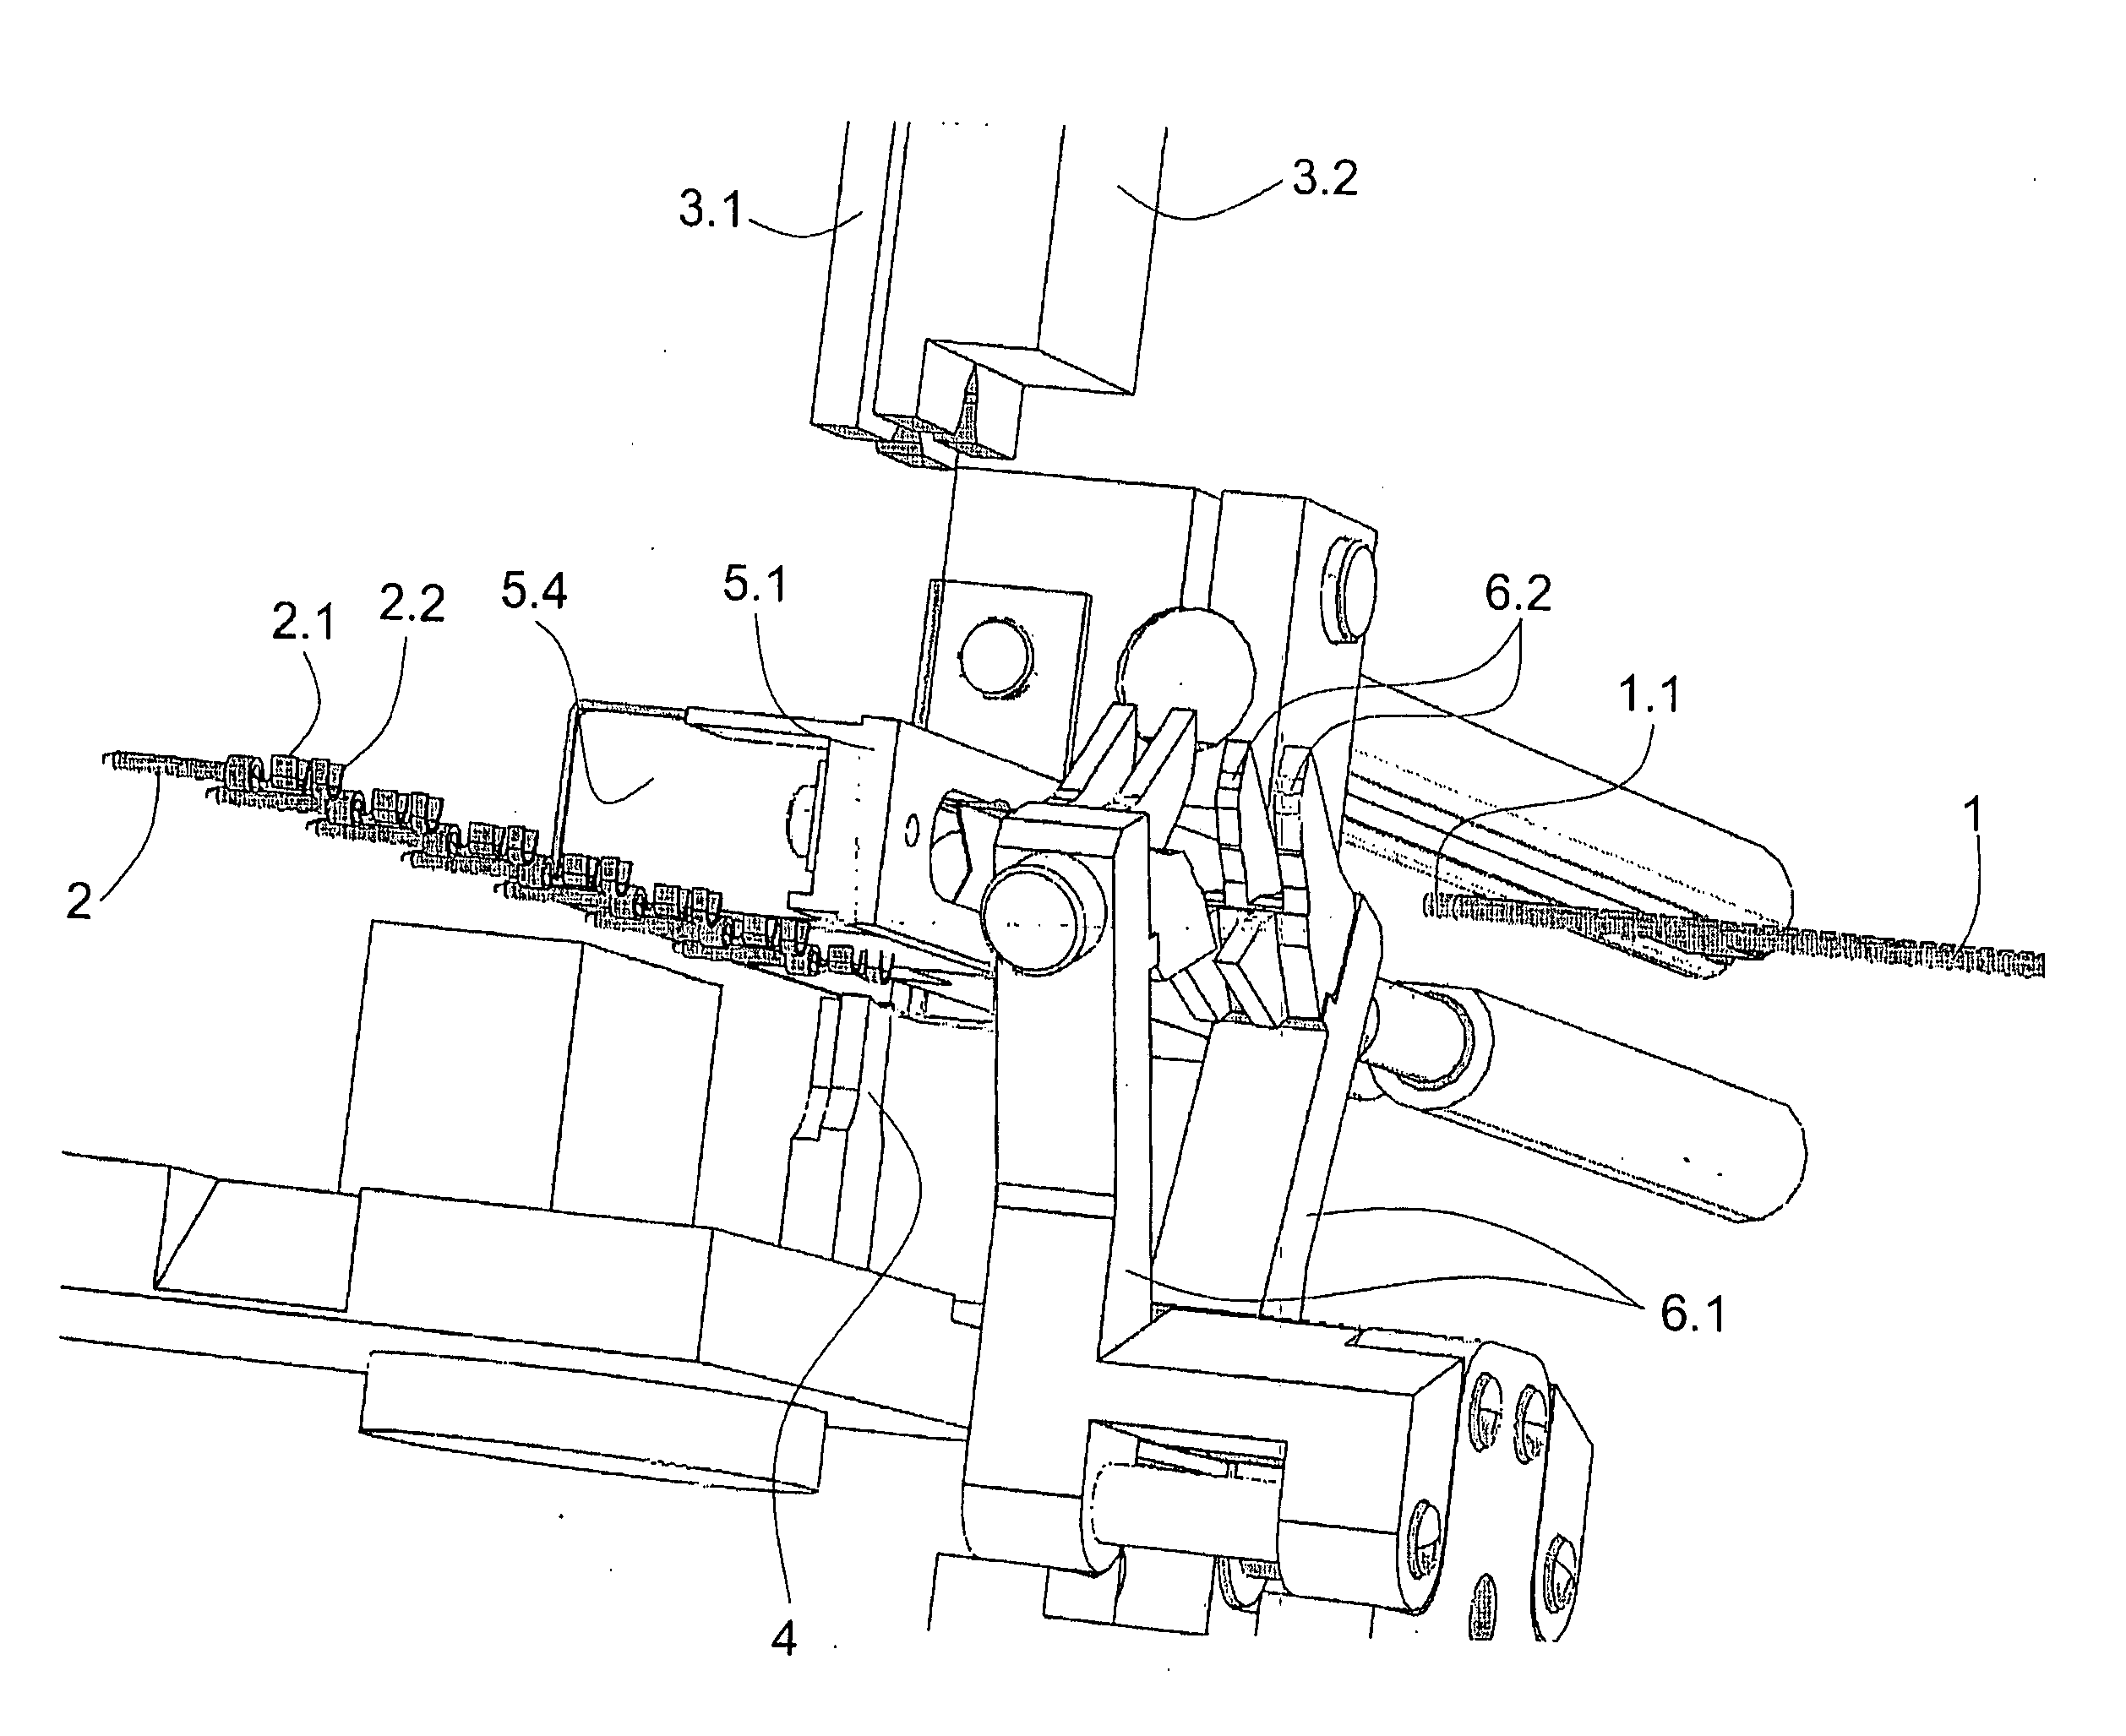 Device for processing a wire